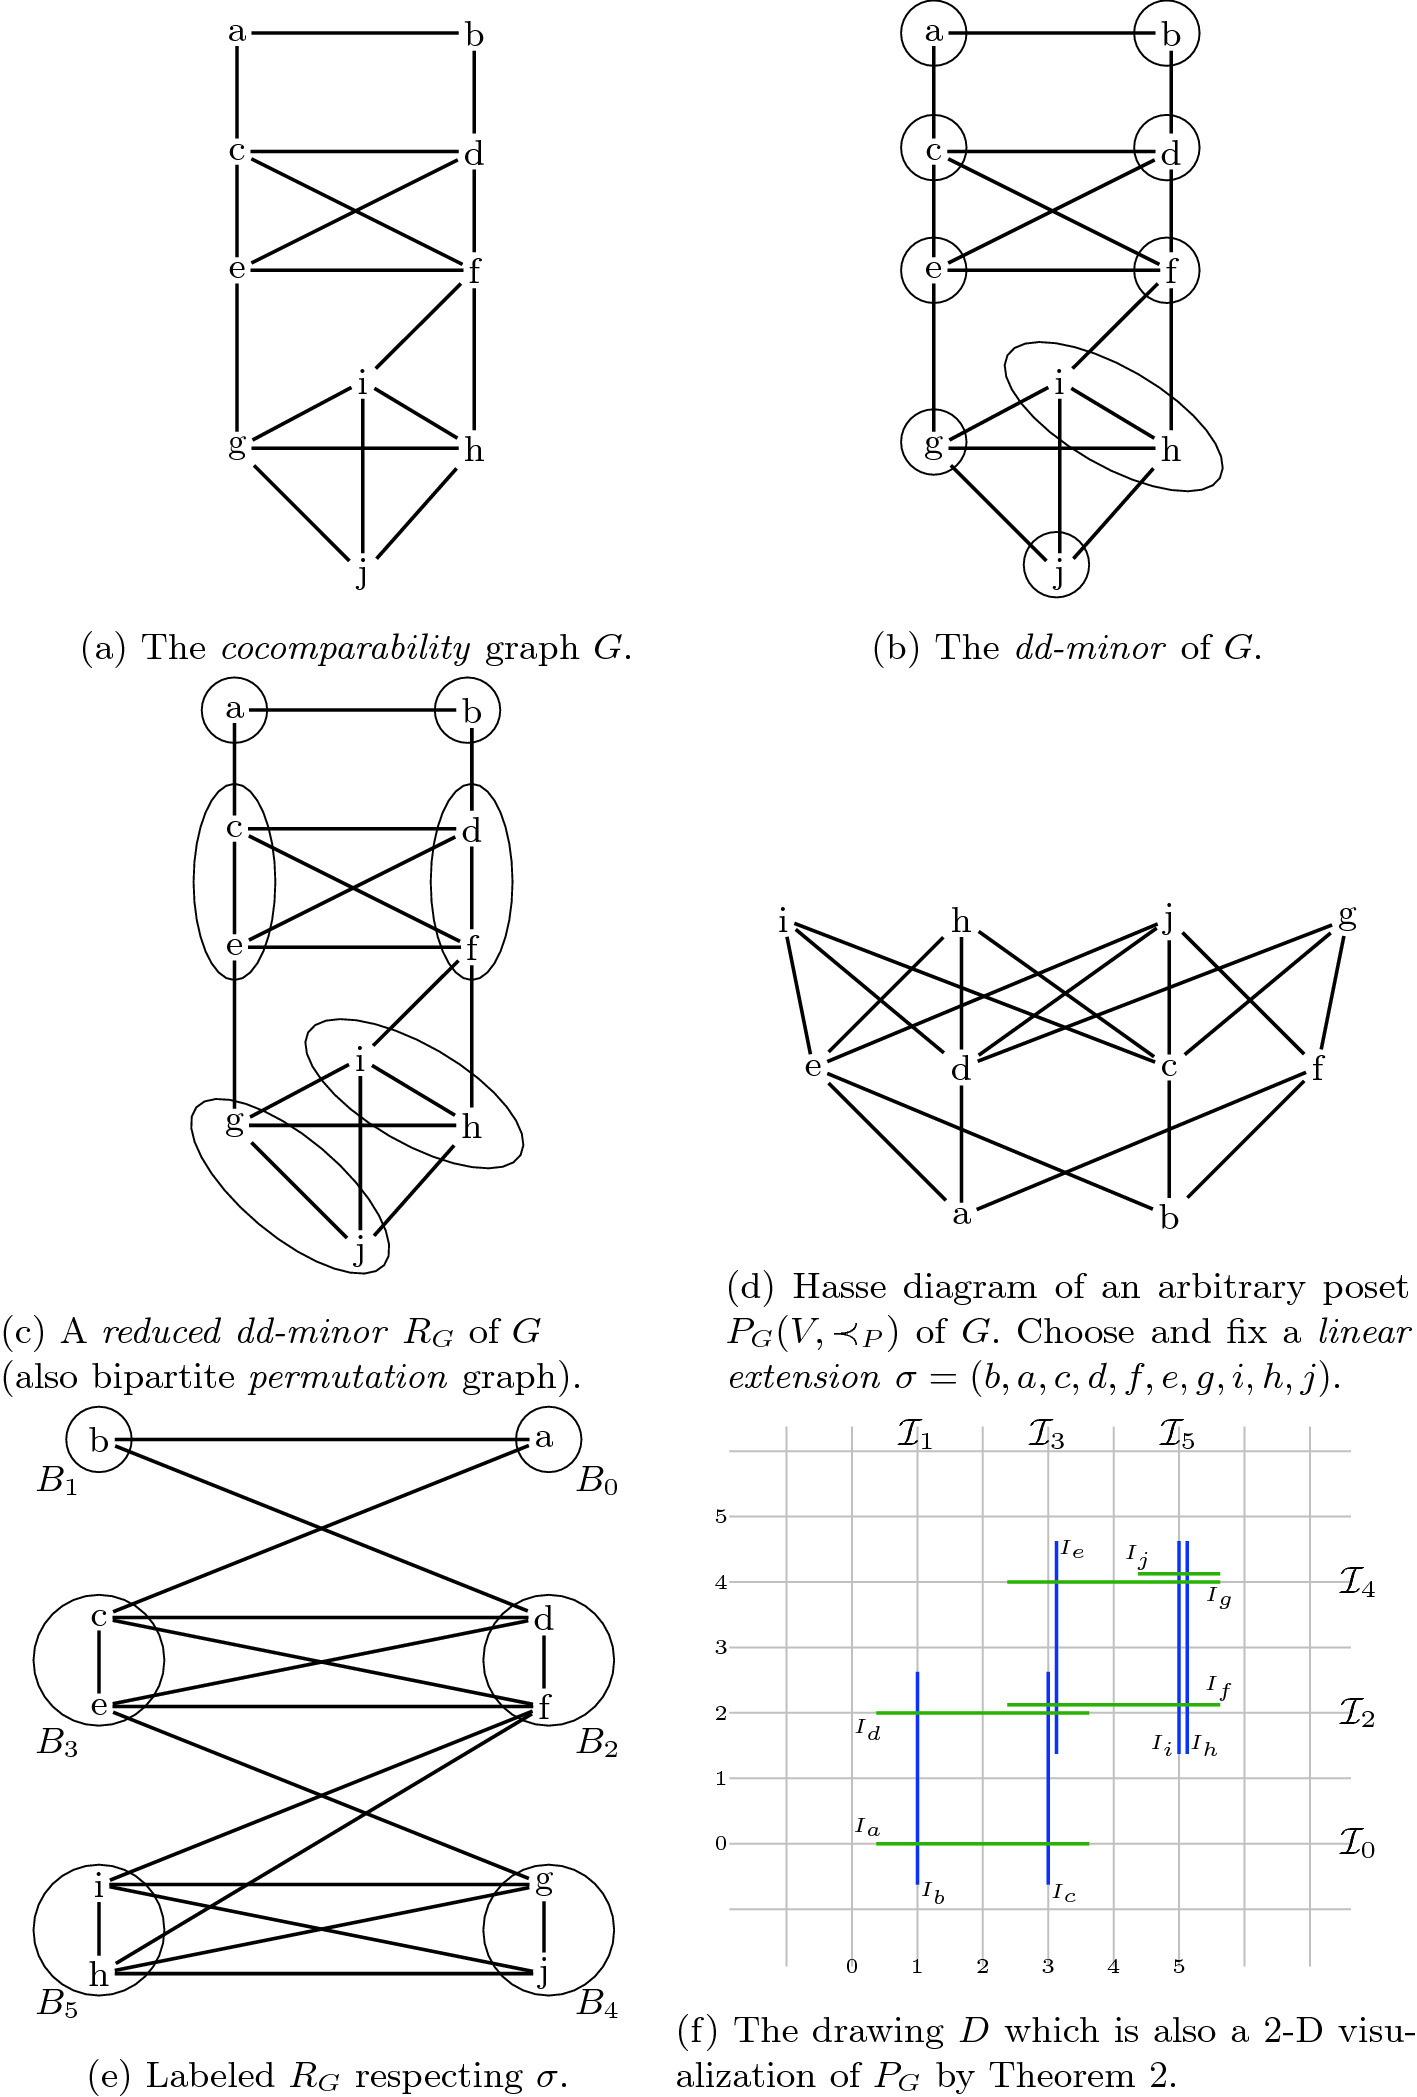 Characterization And A 2d Visualization Of B Equation Vpg Cocomparability Graphs Springerlink